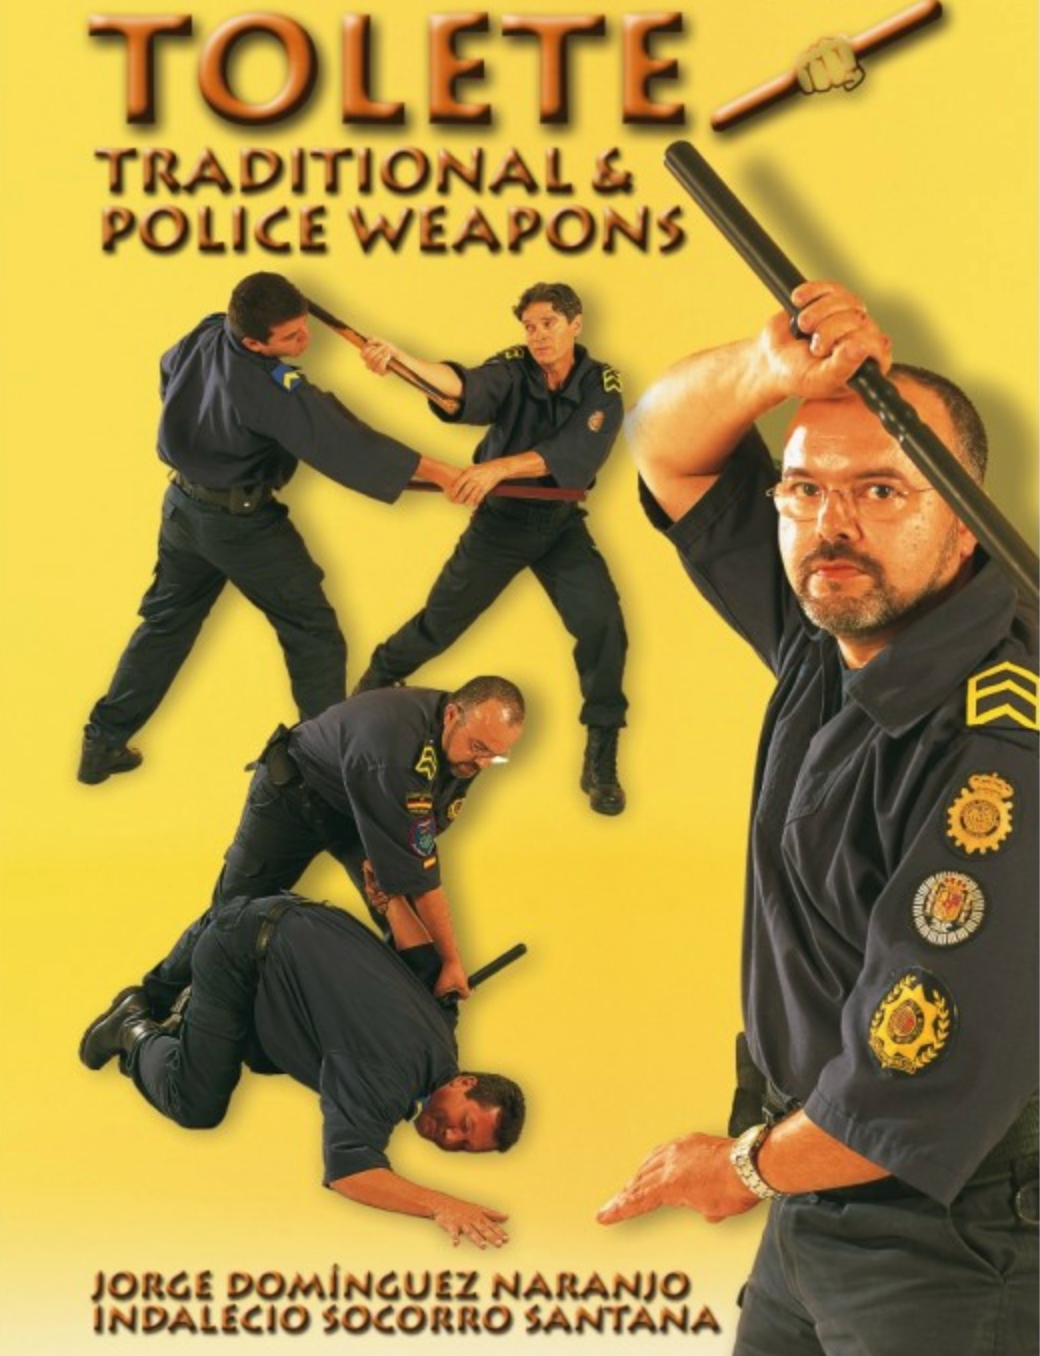 Tolete Canario Traditional & Police Weapon DVD with Jorge Dominguez Naranjo - Budovideos Inc